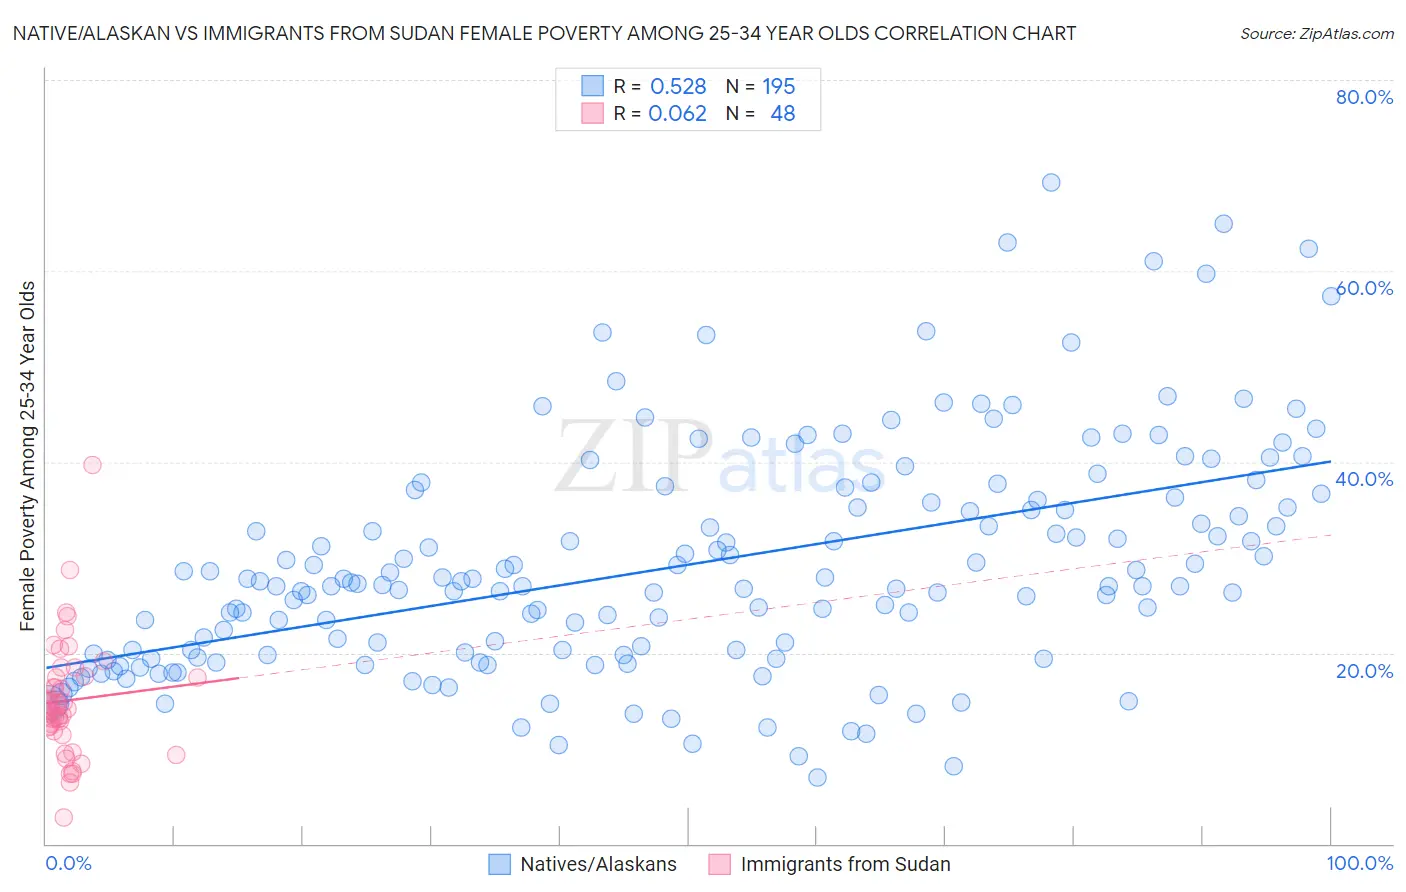 Native/Alaskan vs Immigrants from Sudan Female Poverty Among 25-34 Year Olds